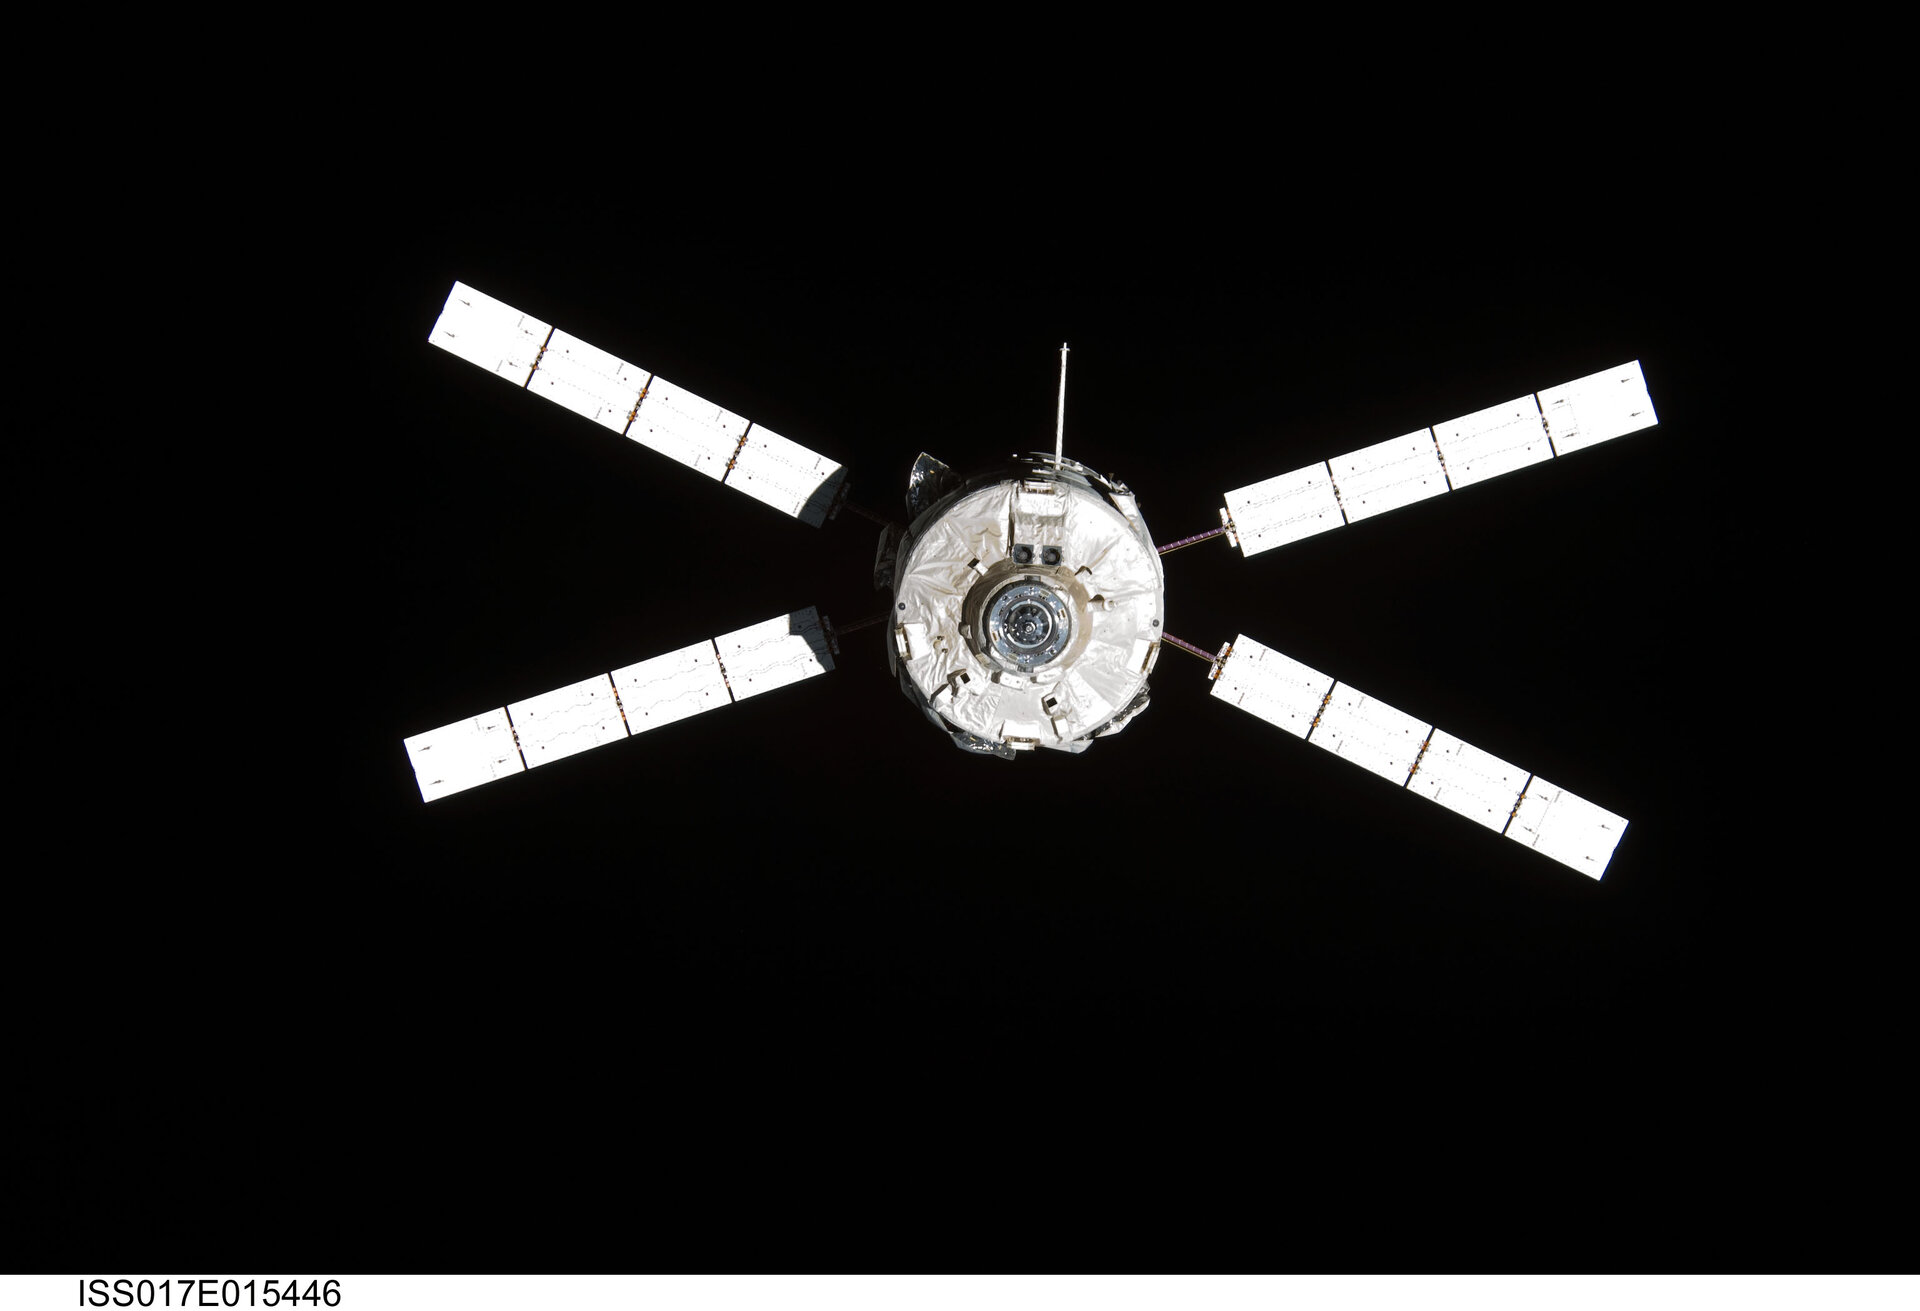 Jules Verne ATV following undocking from the International Space Station